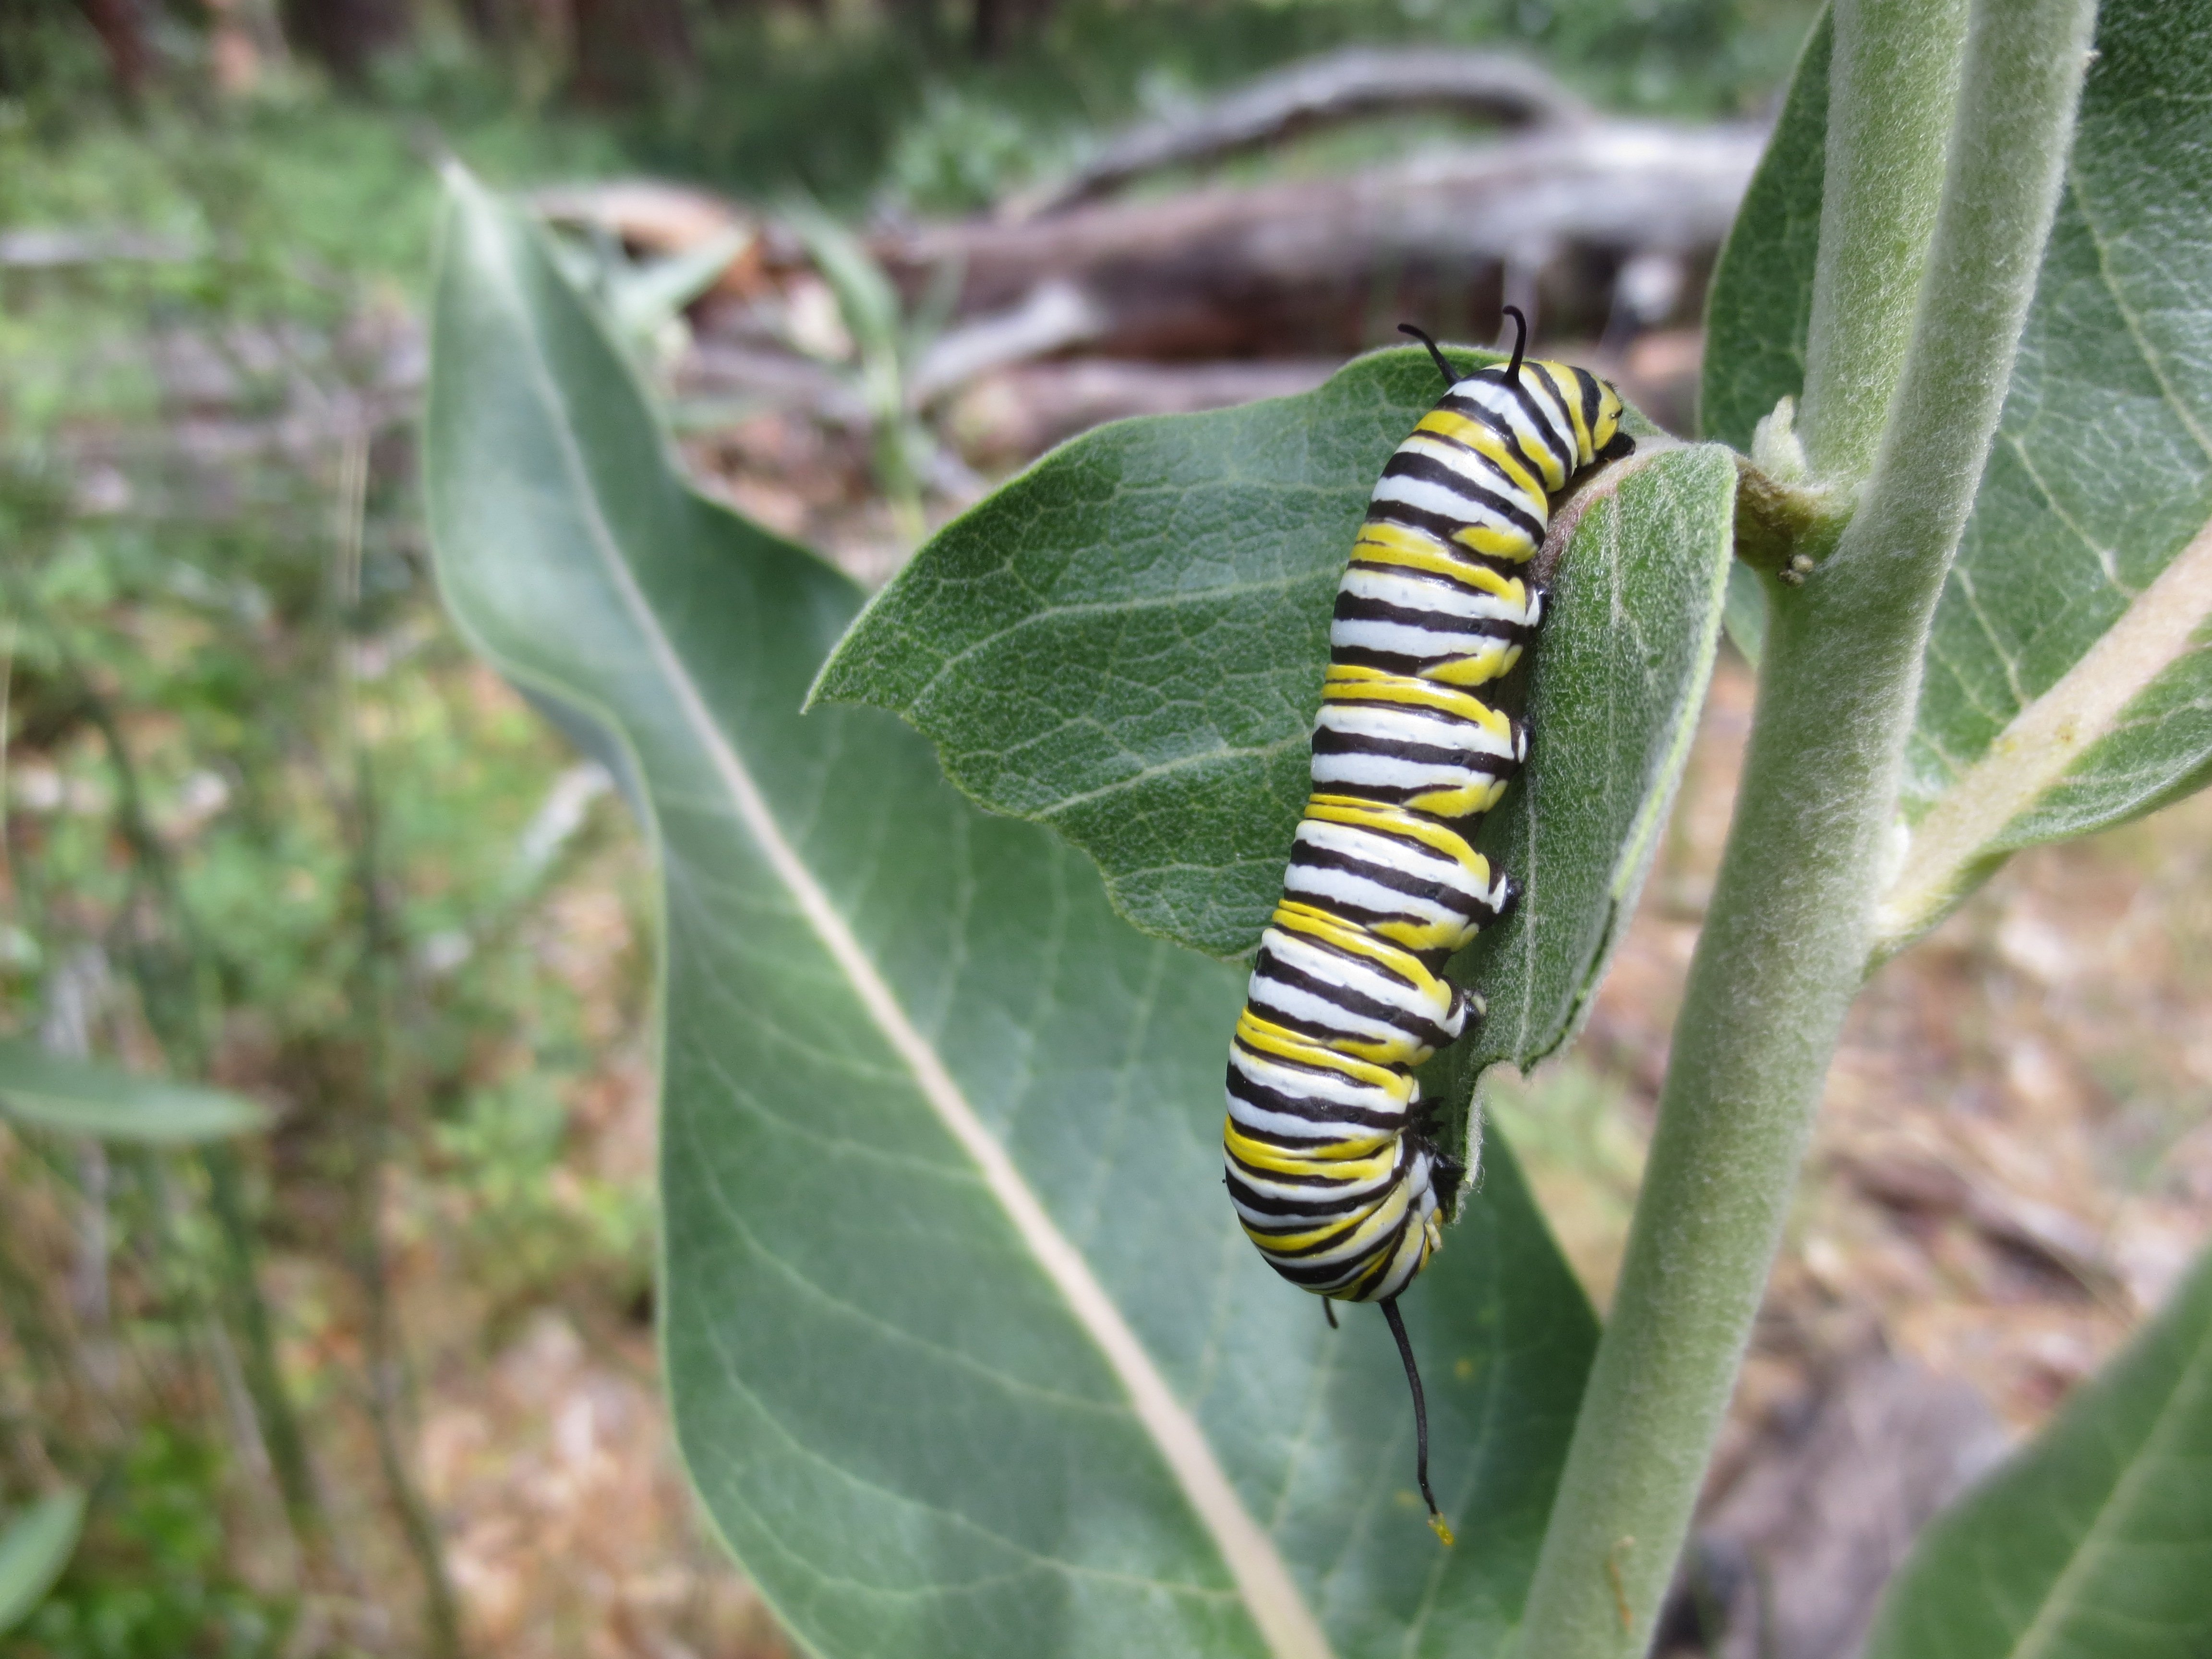 Monarch caterpillar on leaves of showy milkweed.